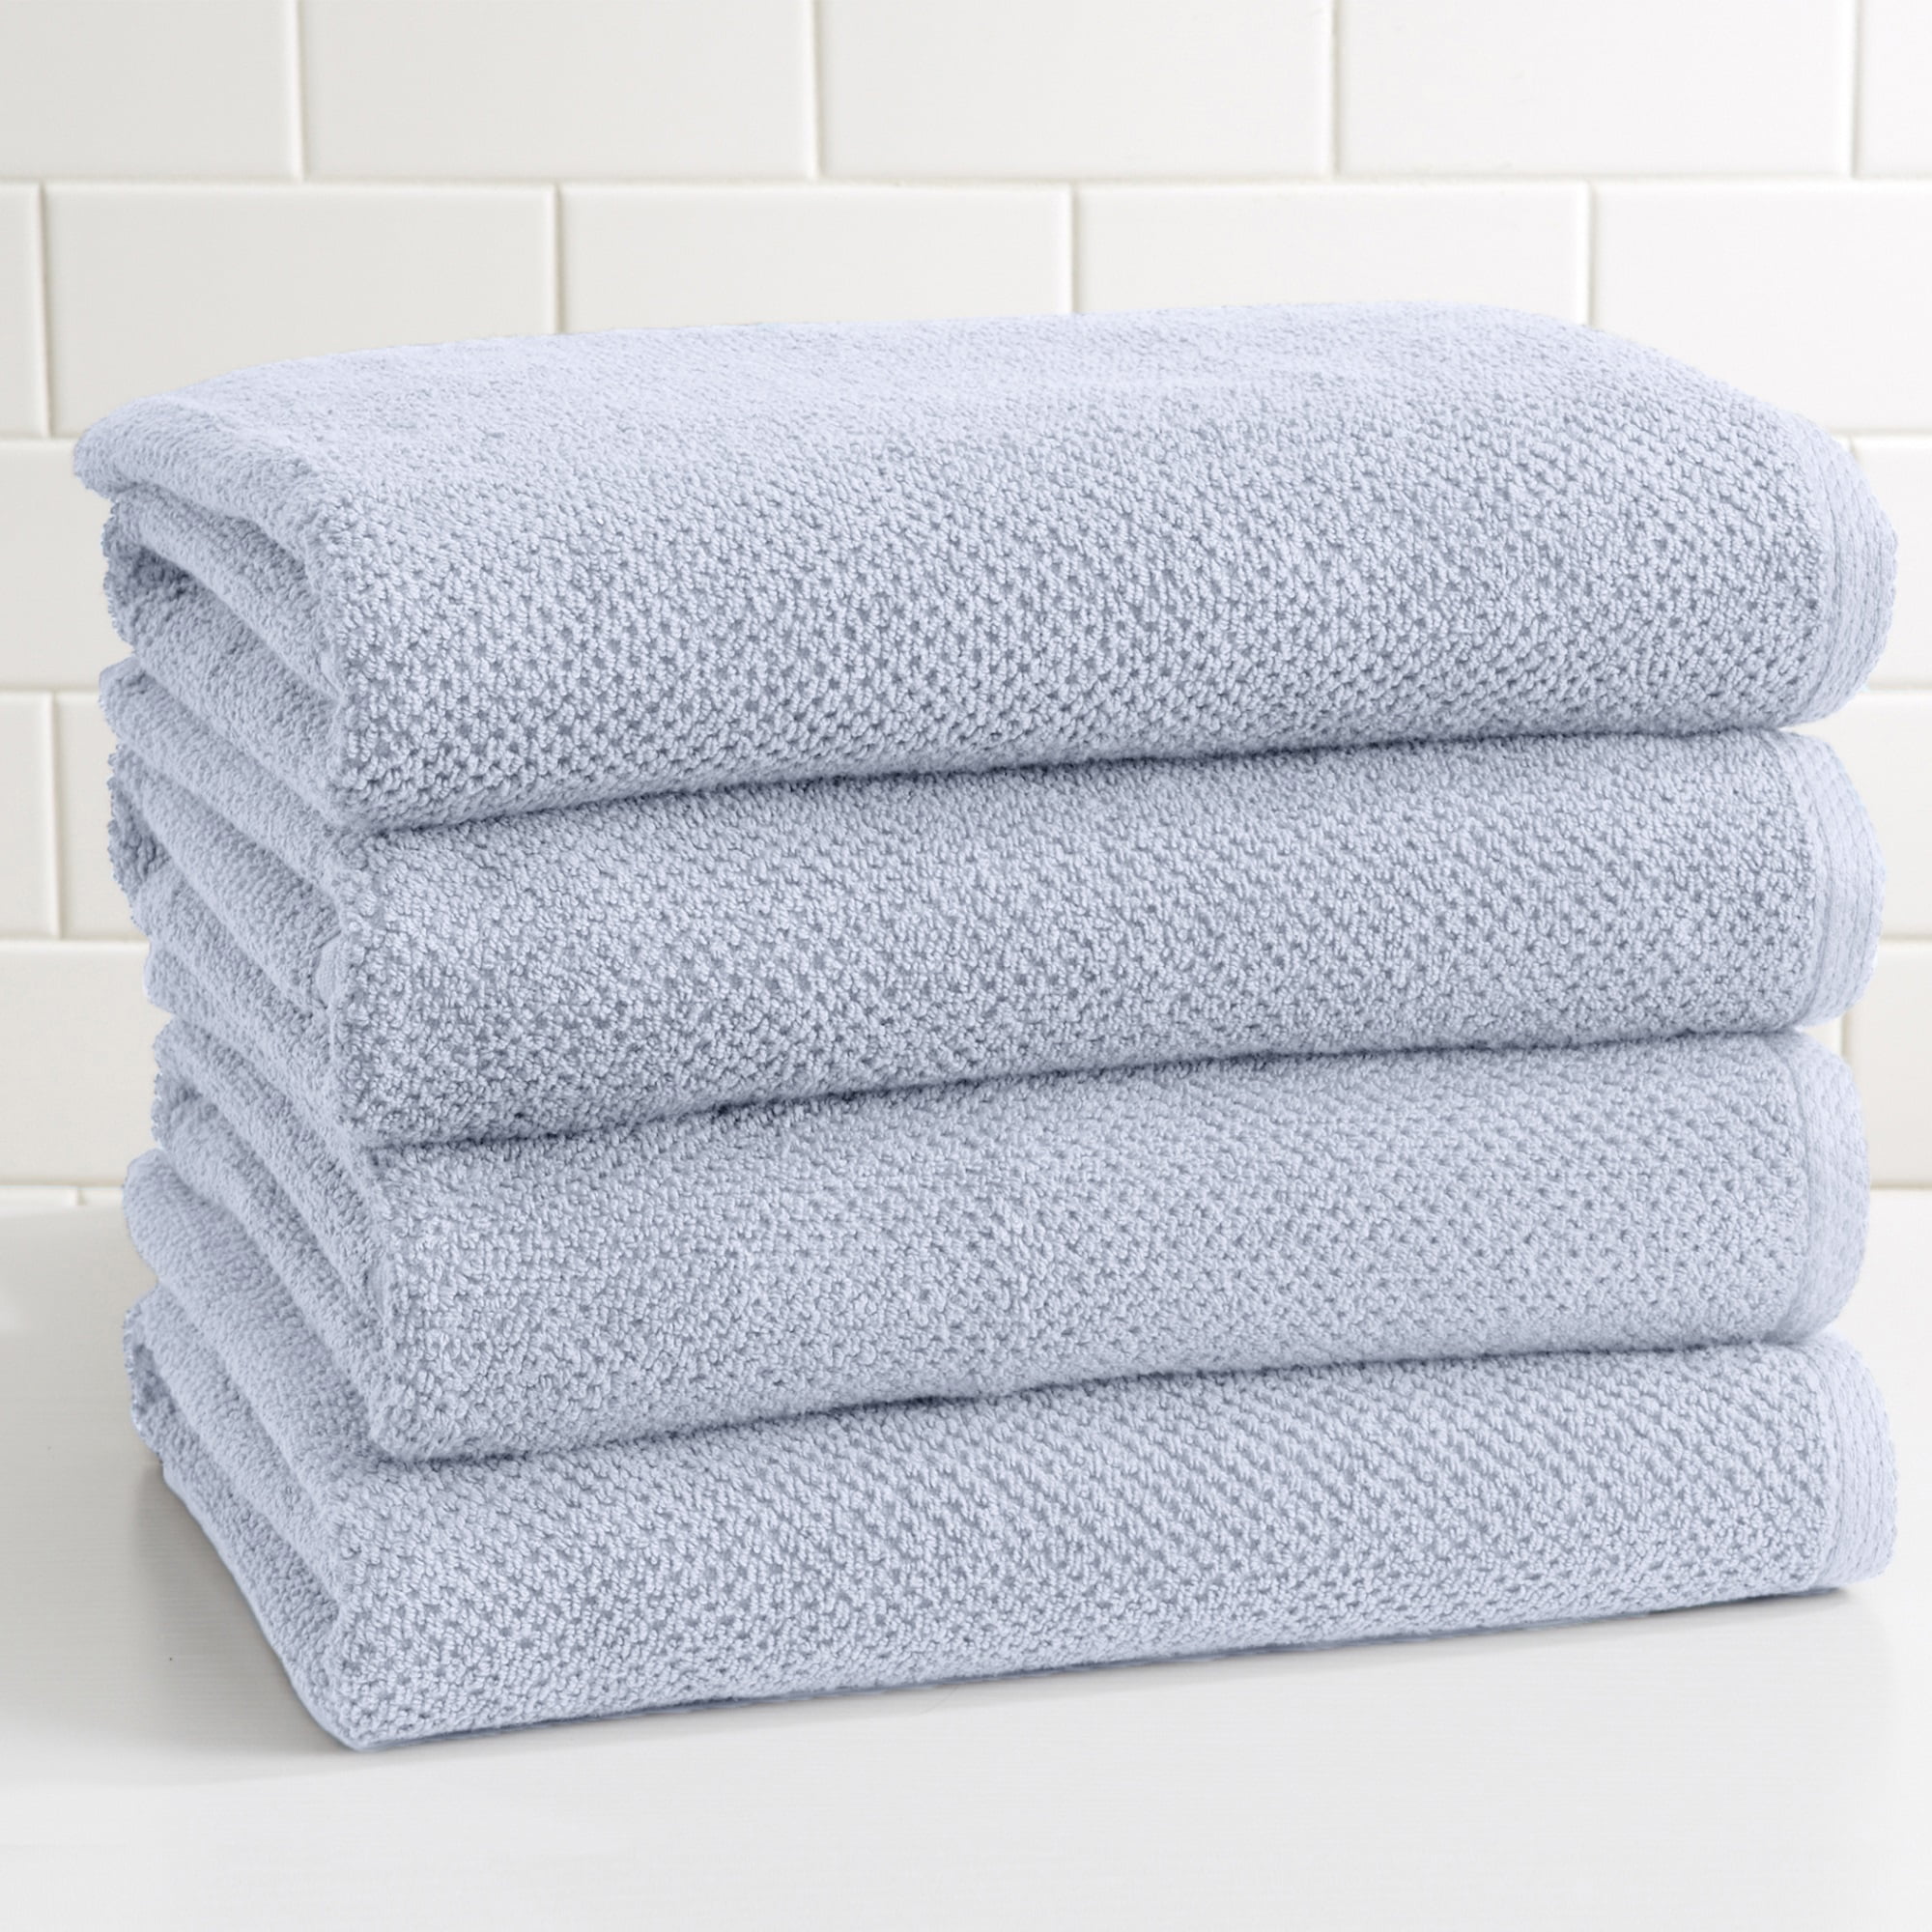 COTTON CRAFT Ultra Soft 6 Pack Hand Towels 16x28 White Weighs 6 Ounces Each  - 100% Pure Ringspun Cotton - Luxurious Rayon Trim - Ideal for Everyday